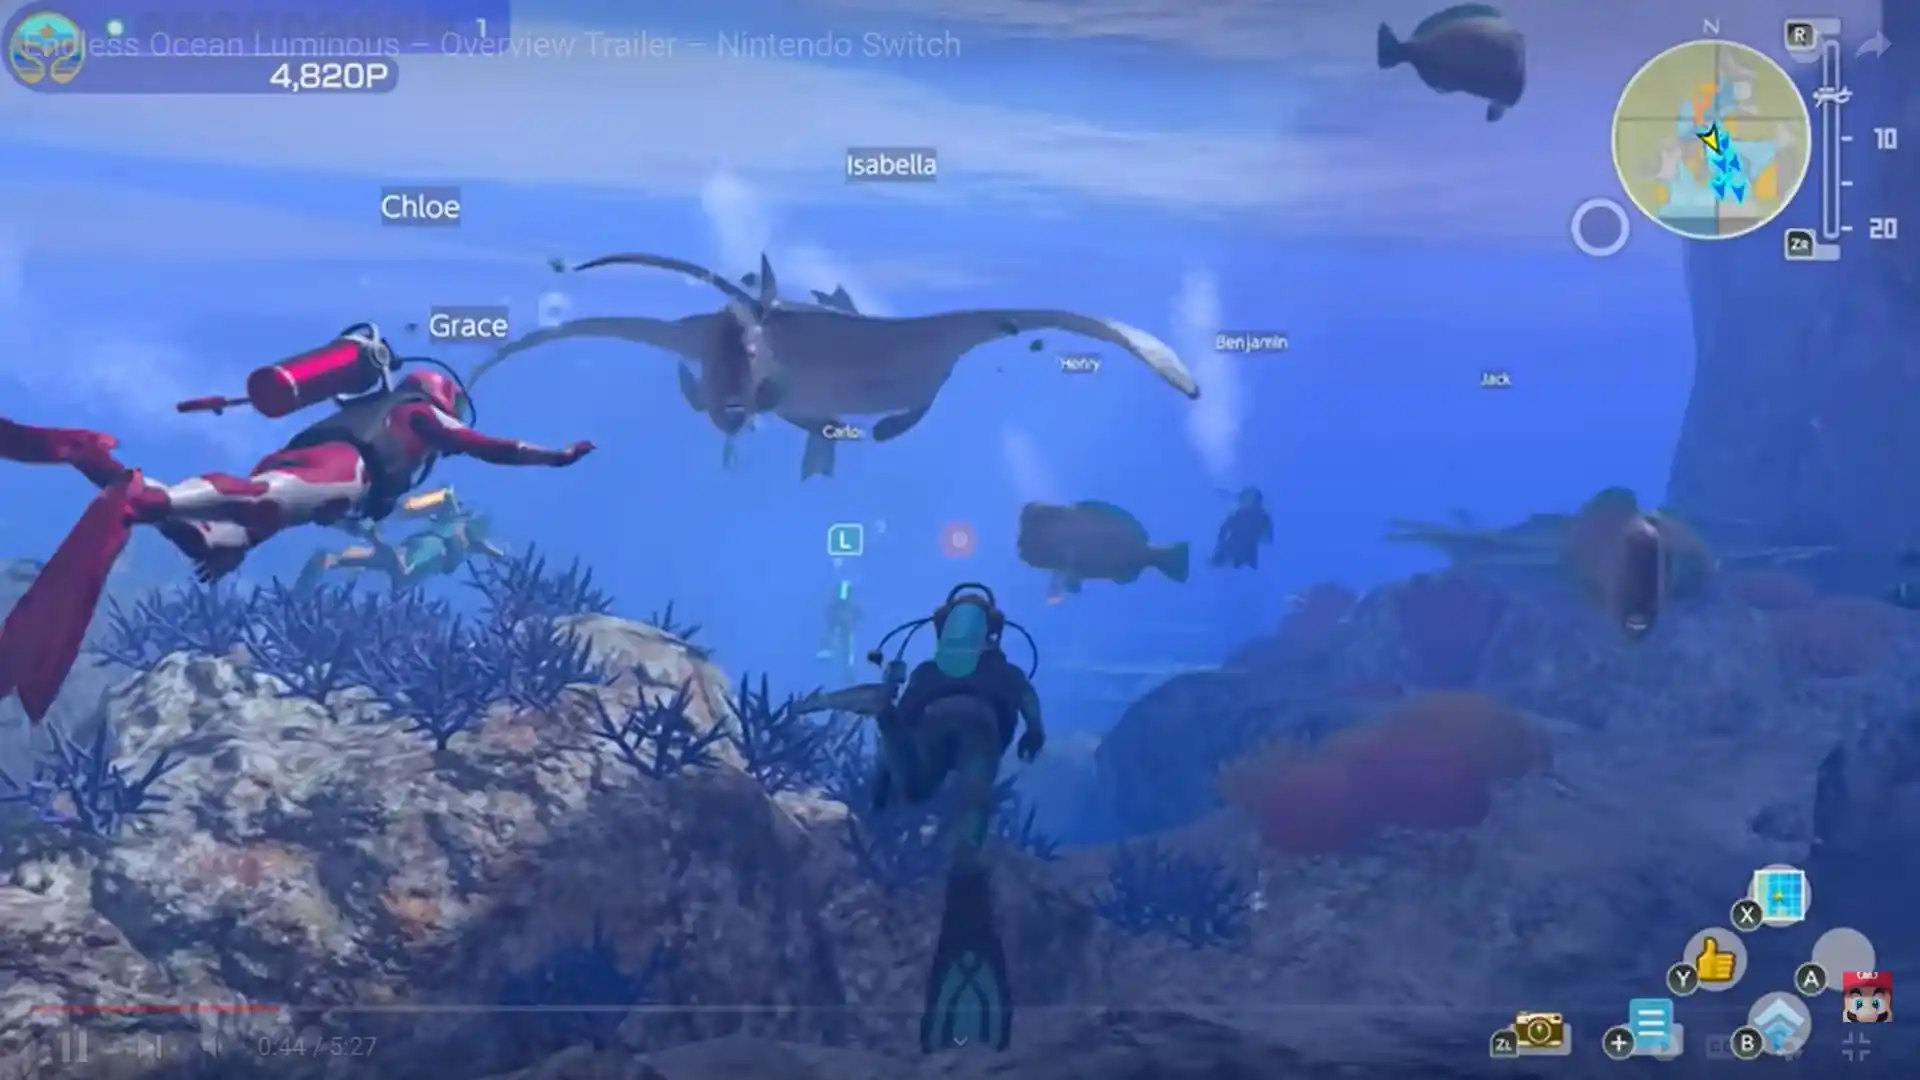 A screenshot of the Endless Ocean Luminous title screen from Nintendo of American's official overview trailer upload. It shows several divers swimming together, following a Stingray swimming off into the distance. Above the players are each of their names.